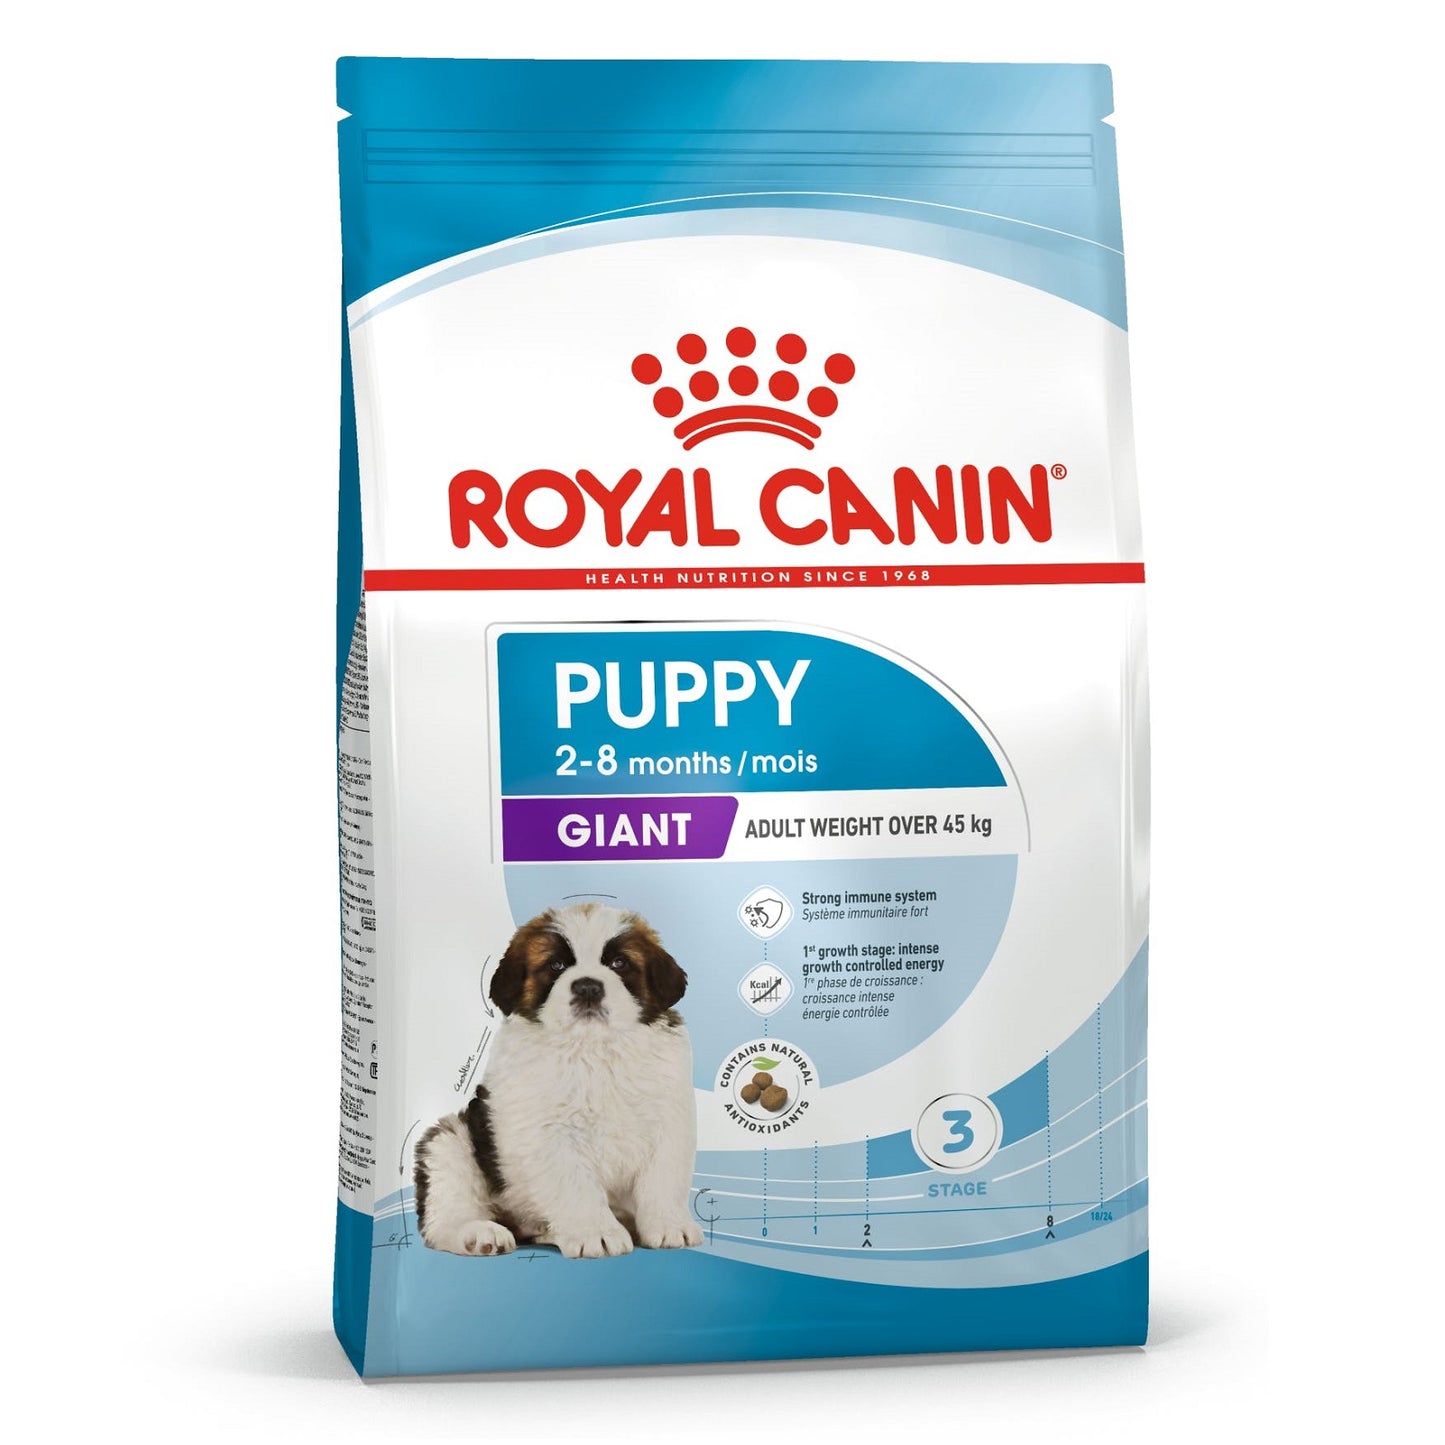 ROYAL CANIN - Giant Puppy (15kg)